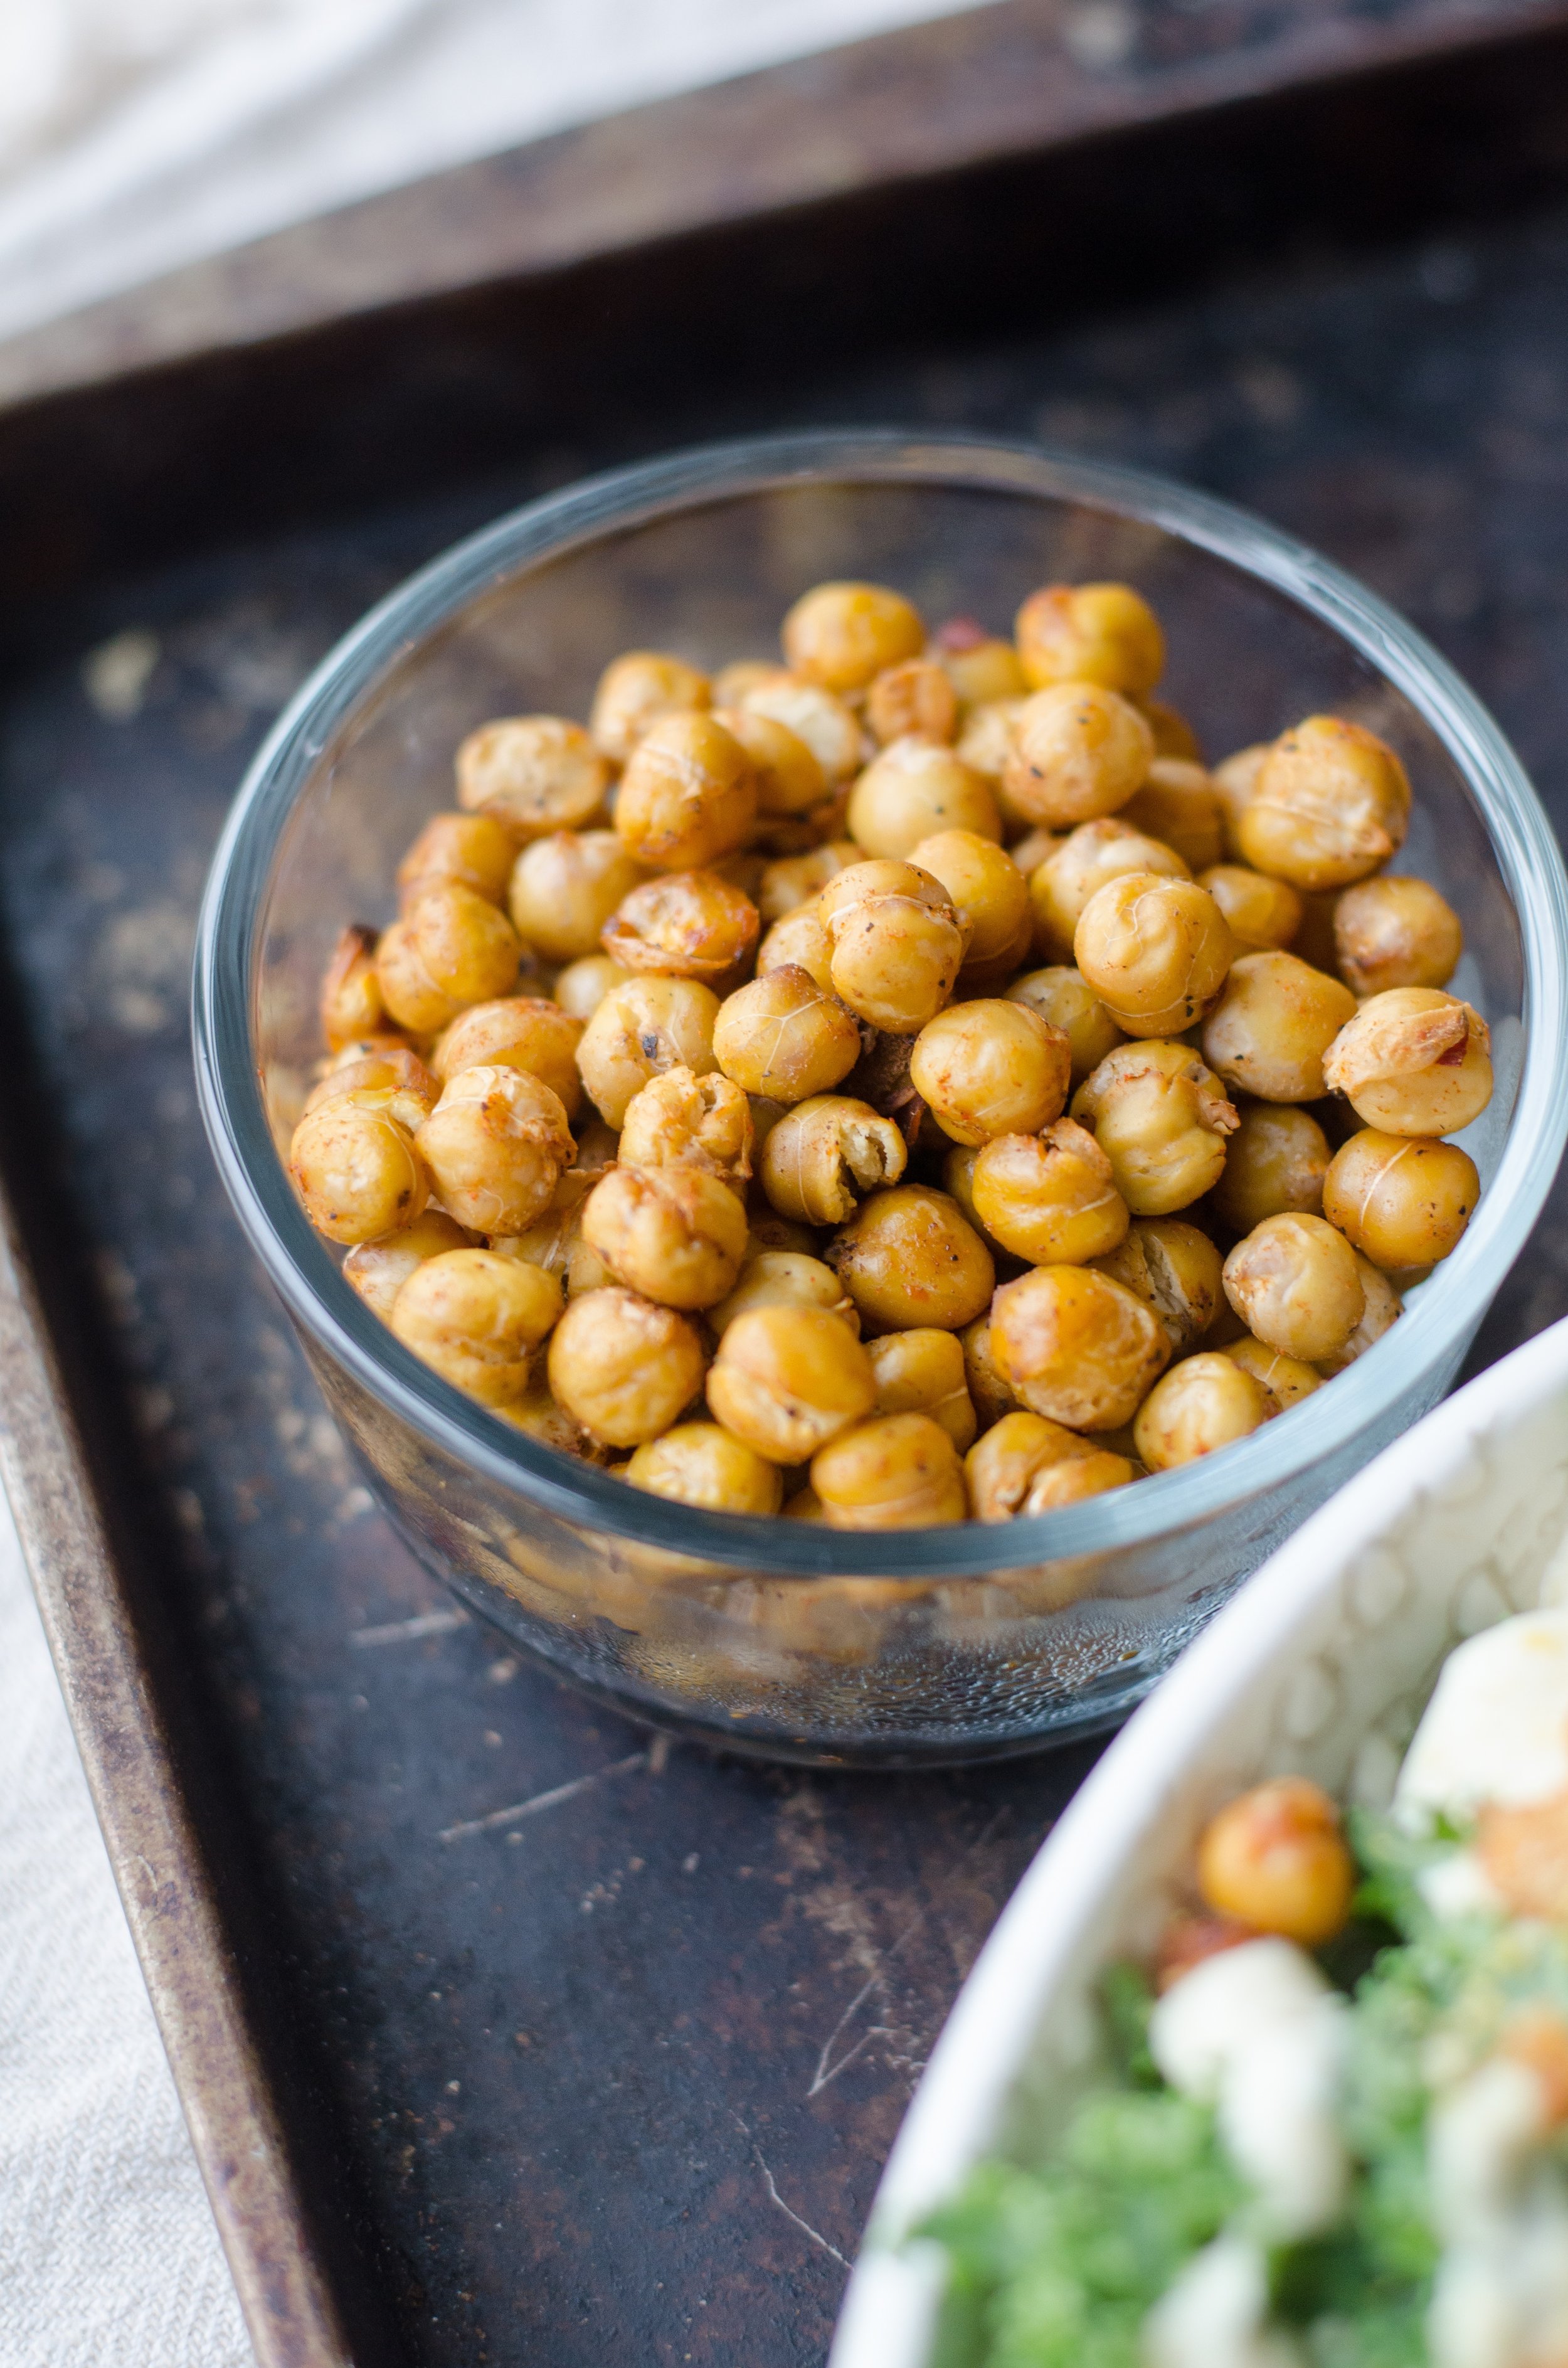 CHickpeas are part of the legume family. Photo by Deryn Macey.